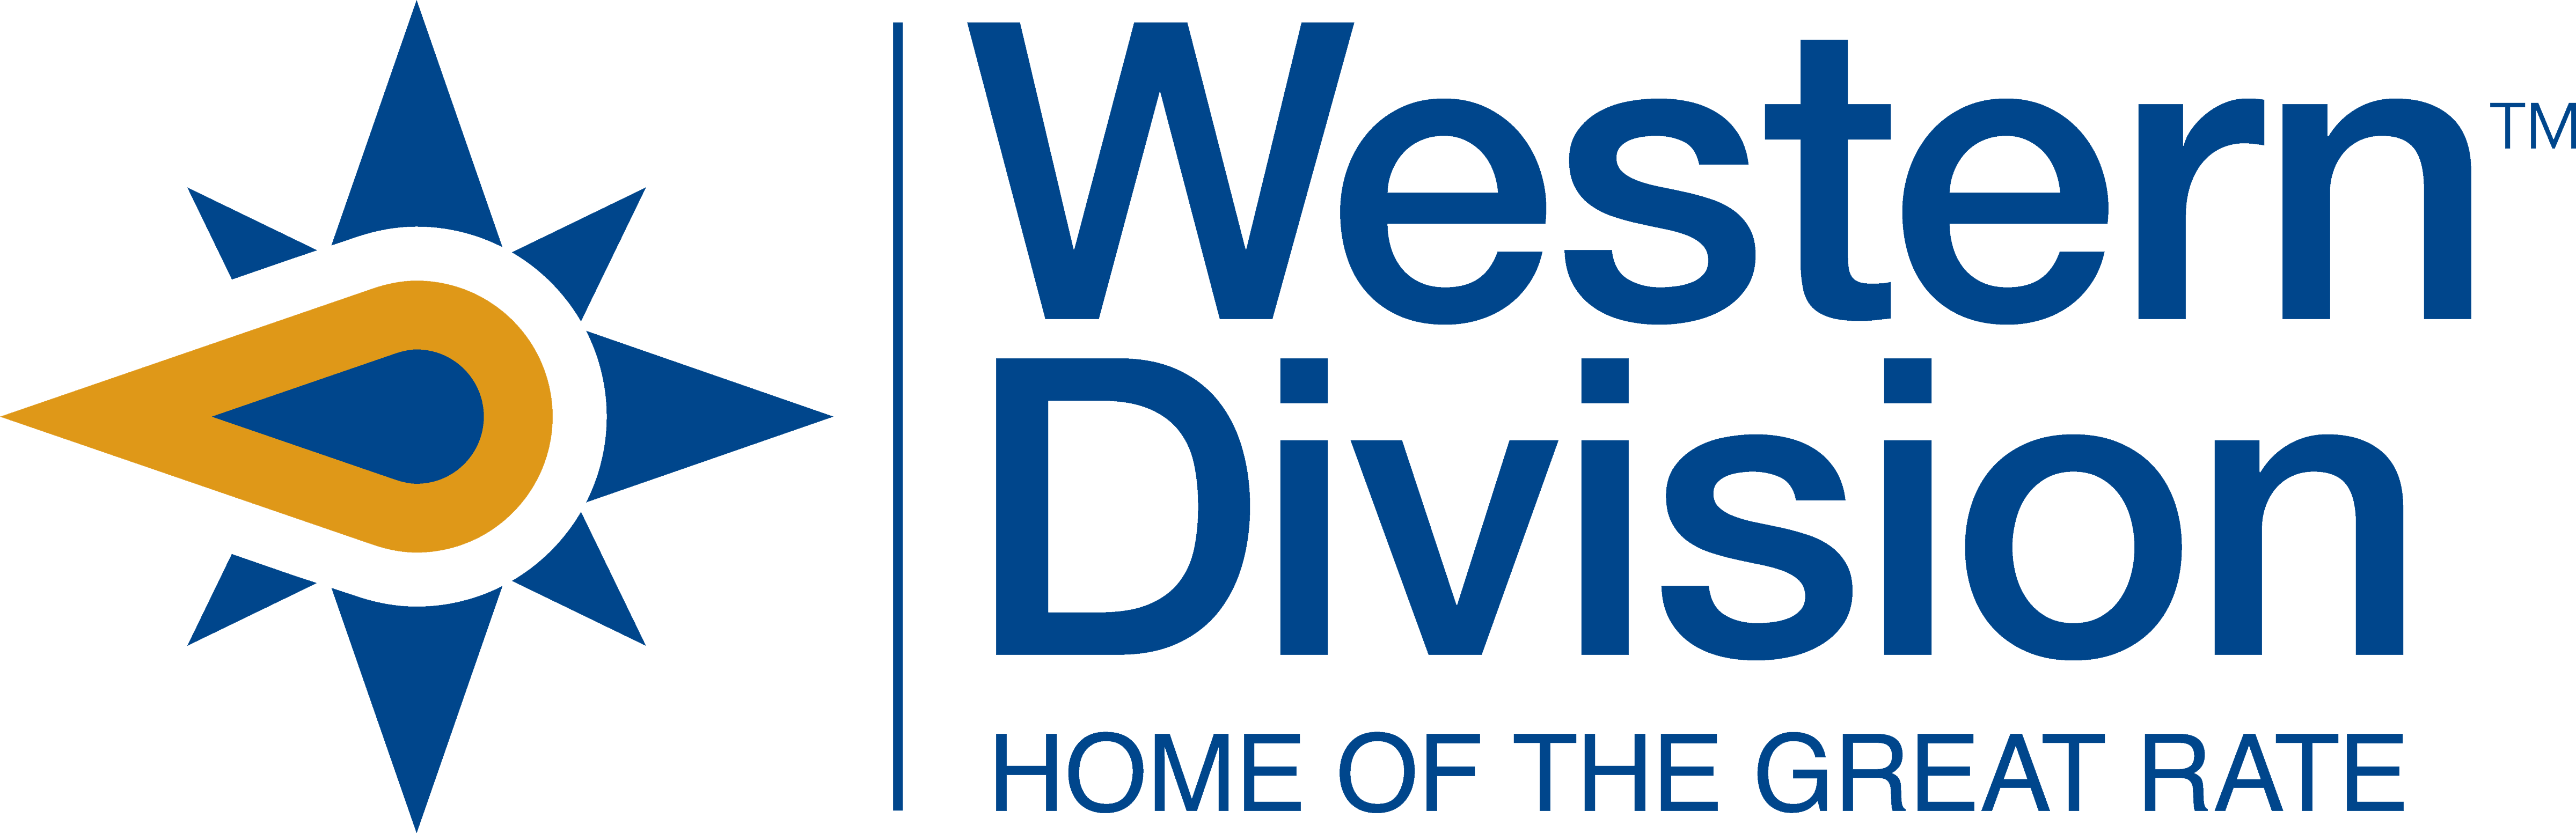 Who We Are - Western Division Federal Credit Union